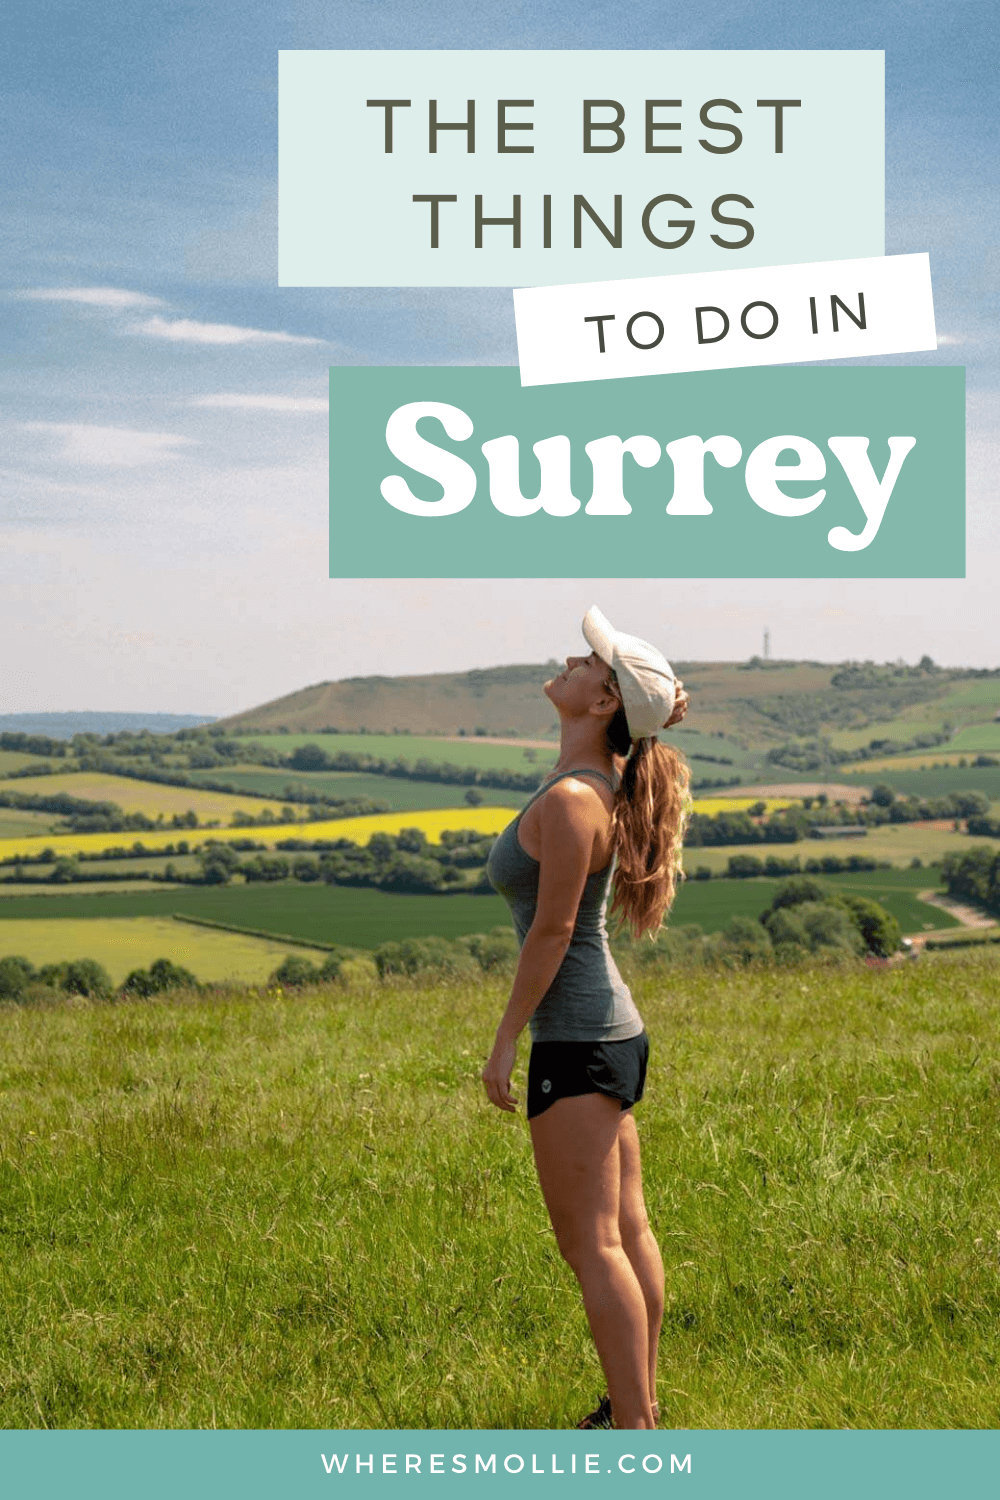 The best places to visit in Surrey, England